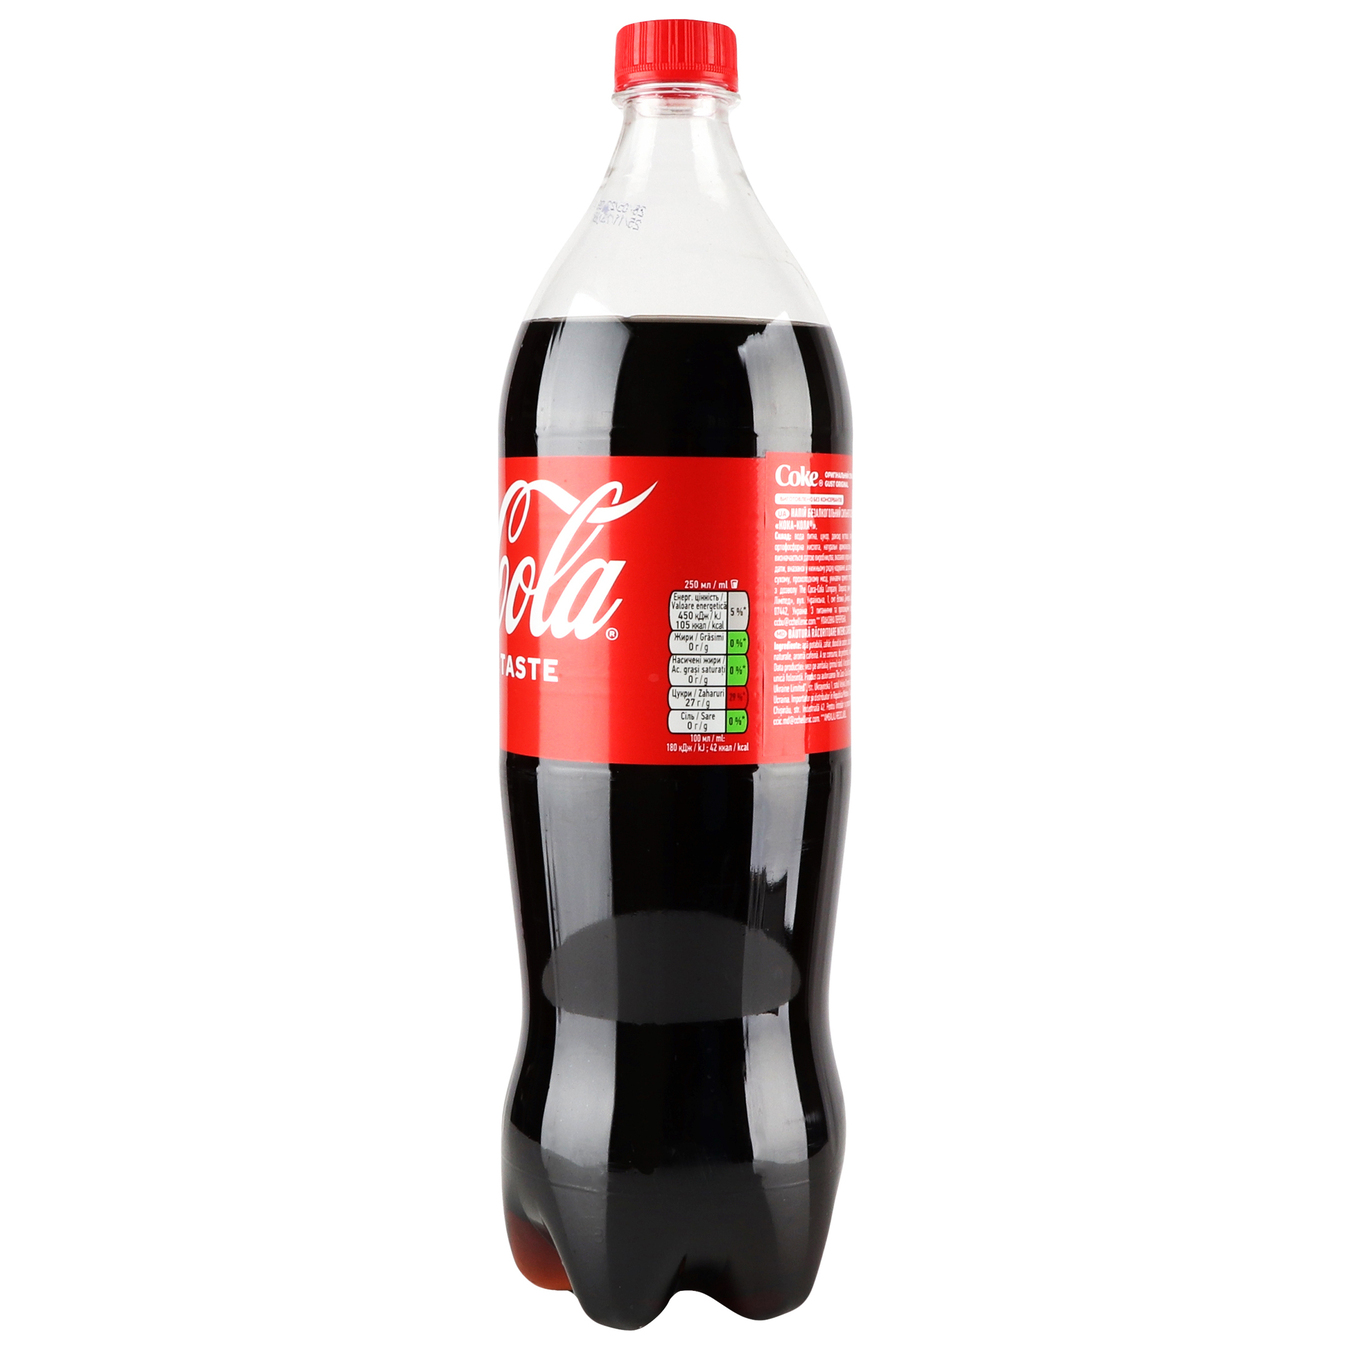 Coca-Cola highly carbonated drink 1.25 l PET 4